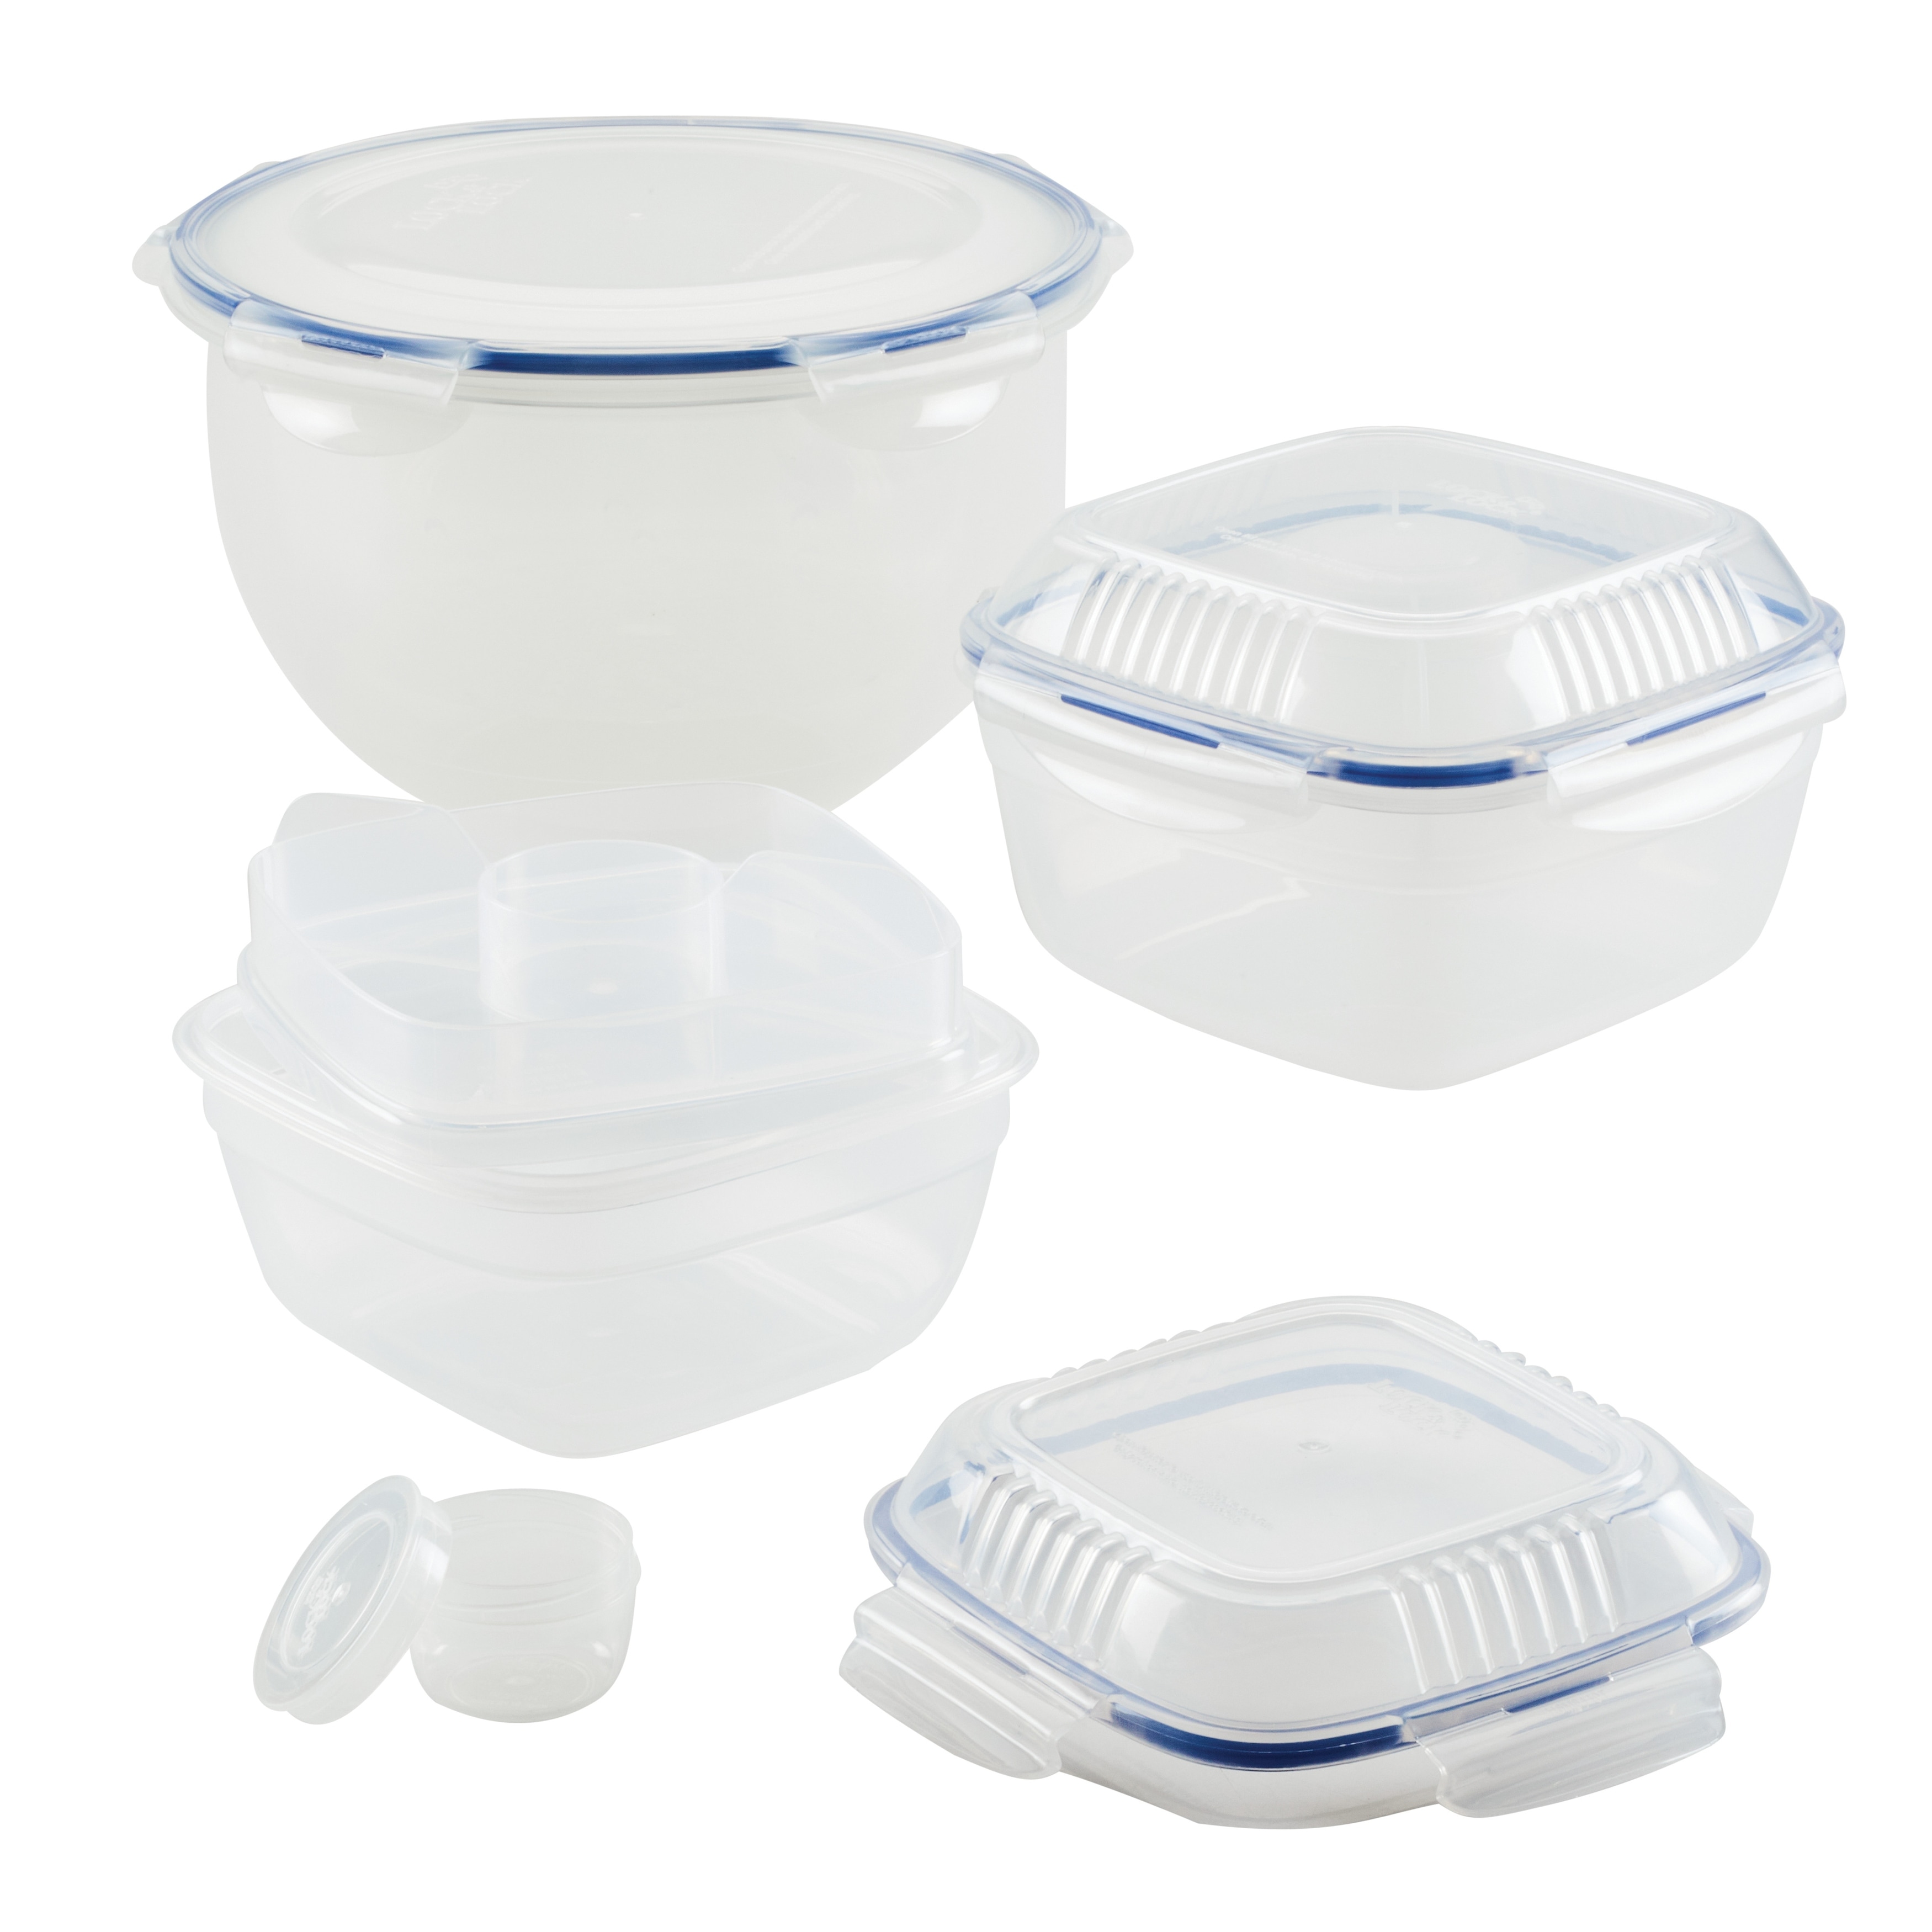 https://ak1.ostkcdn.com/images/products/is/images/direct/97d59cb572fc5db782a04f63a901ae2774aaba3a/LocknLock-On-the-Go-Meals-Salad-Container-Set%2C-6-Piece%2C-Clear.jpg